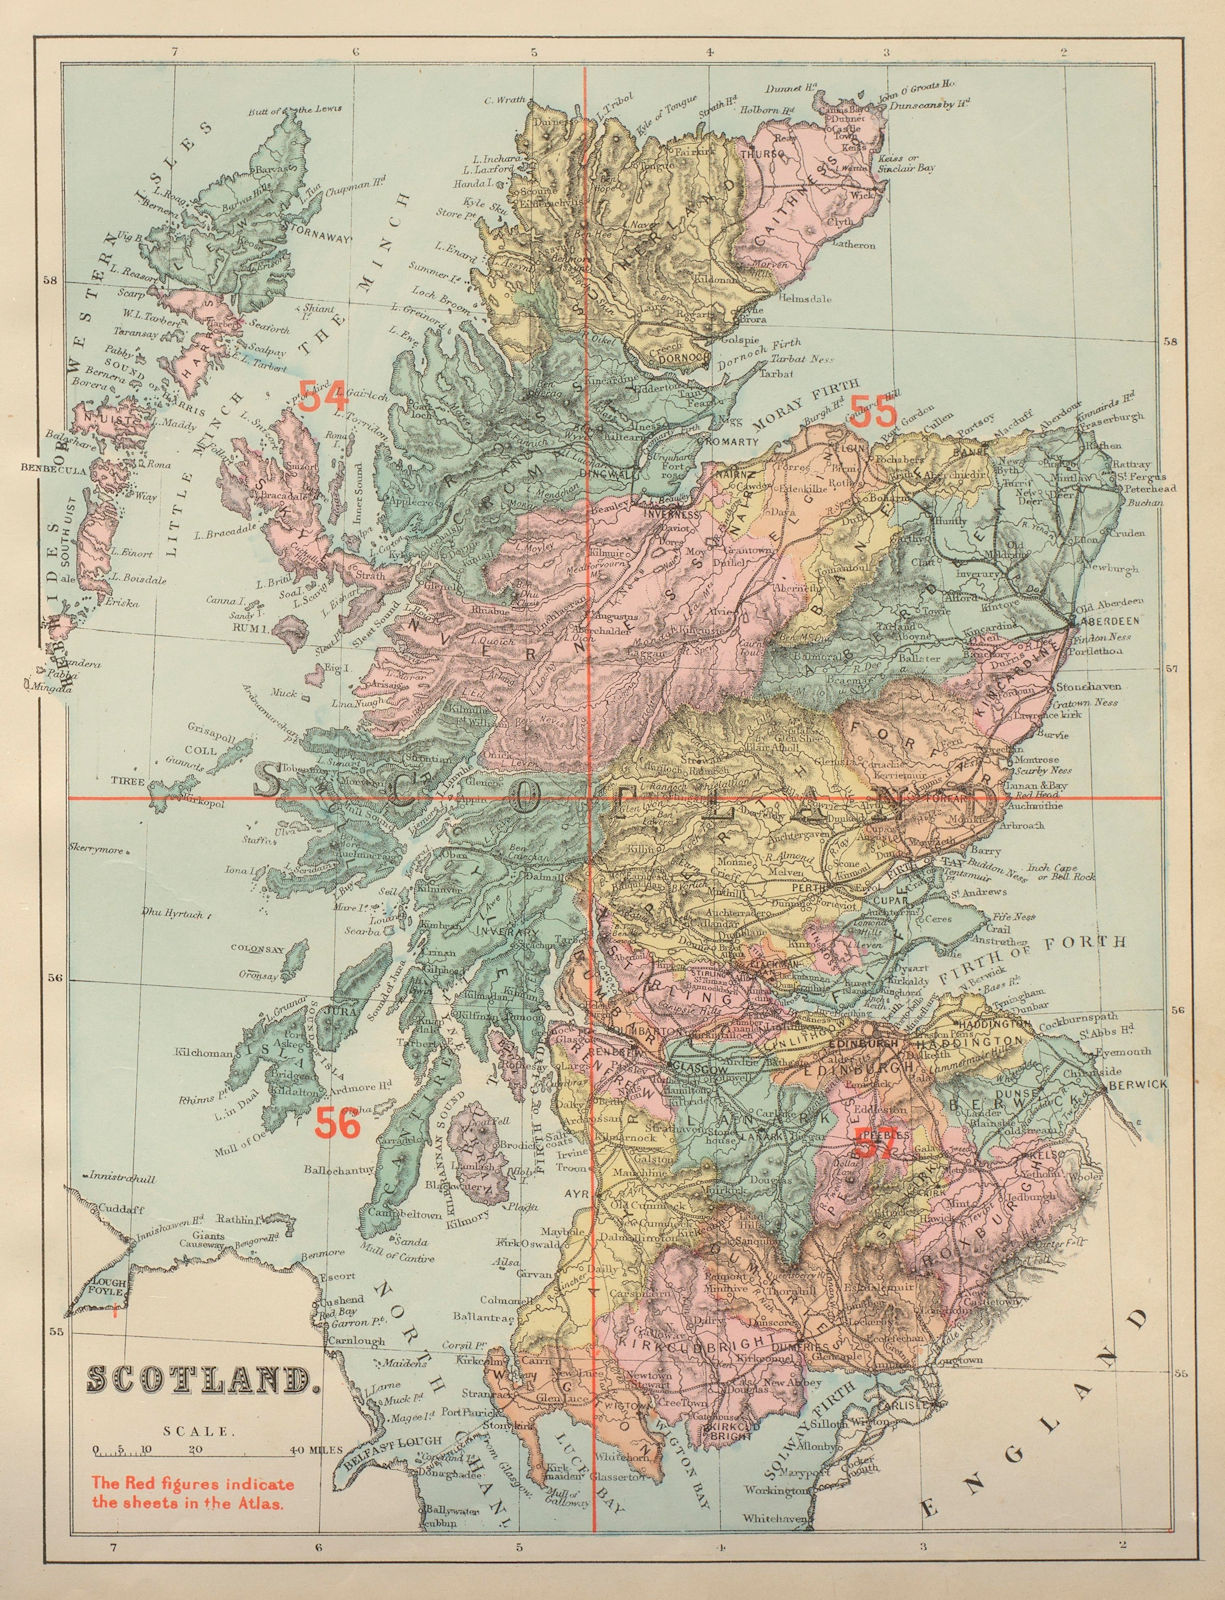 Associate Product SCOTLAND antique index map by GW BACON 1885 old vintage plan chart